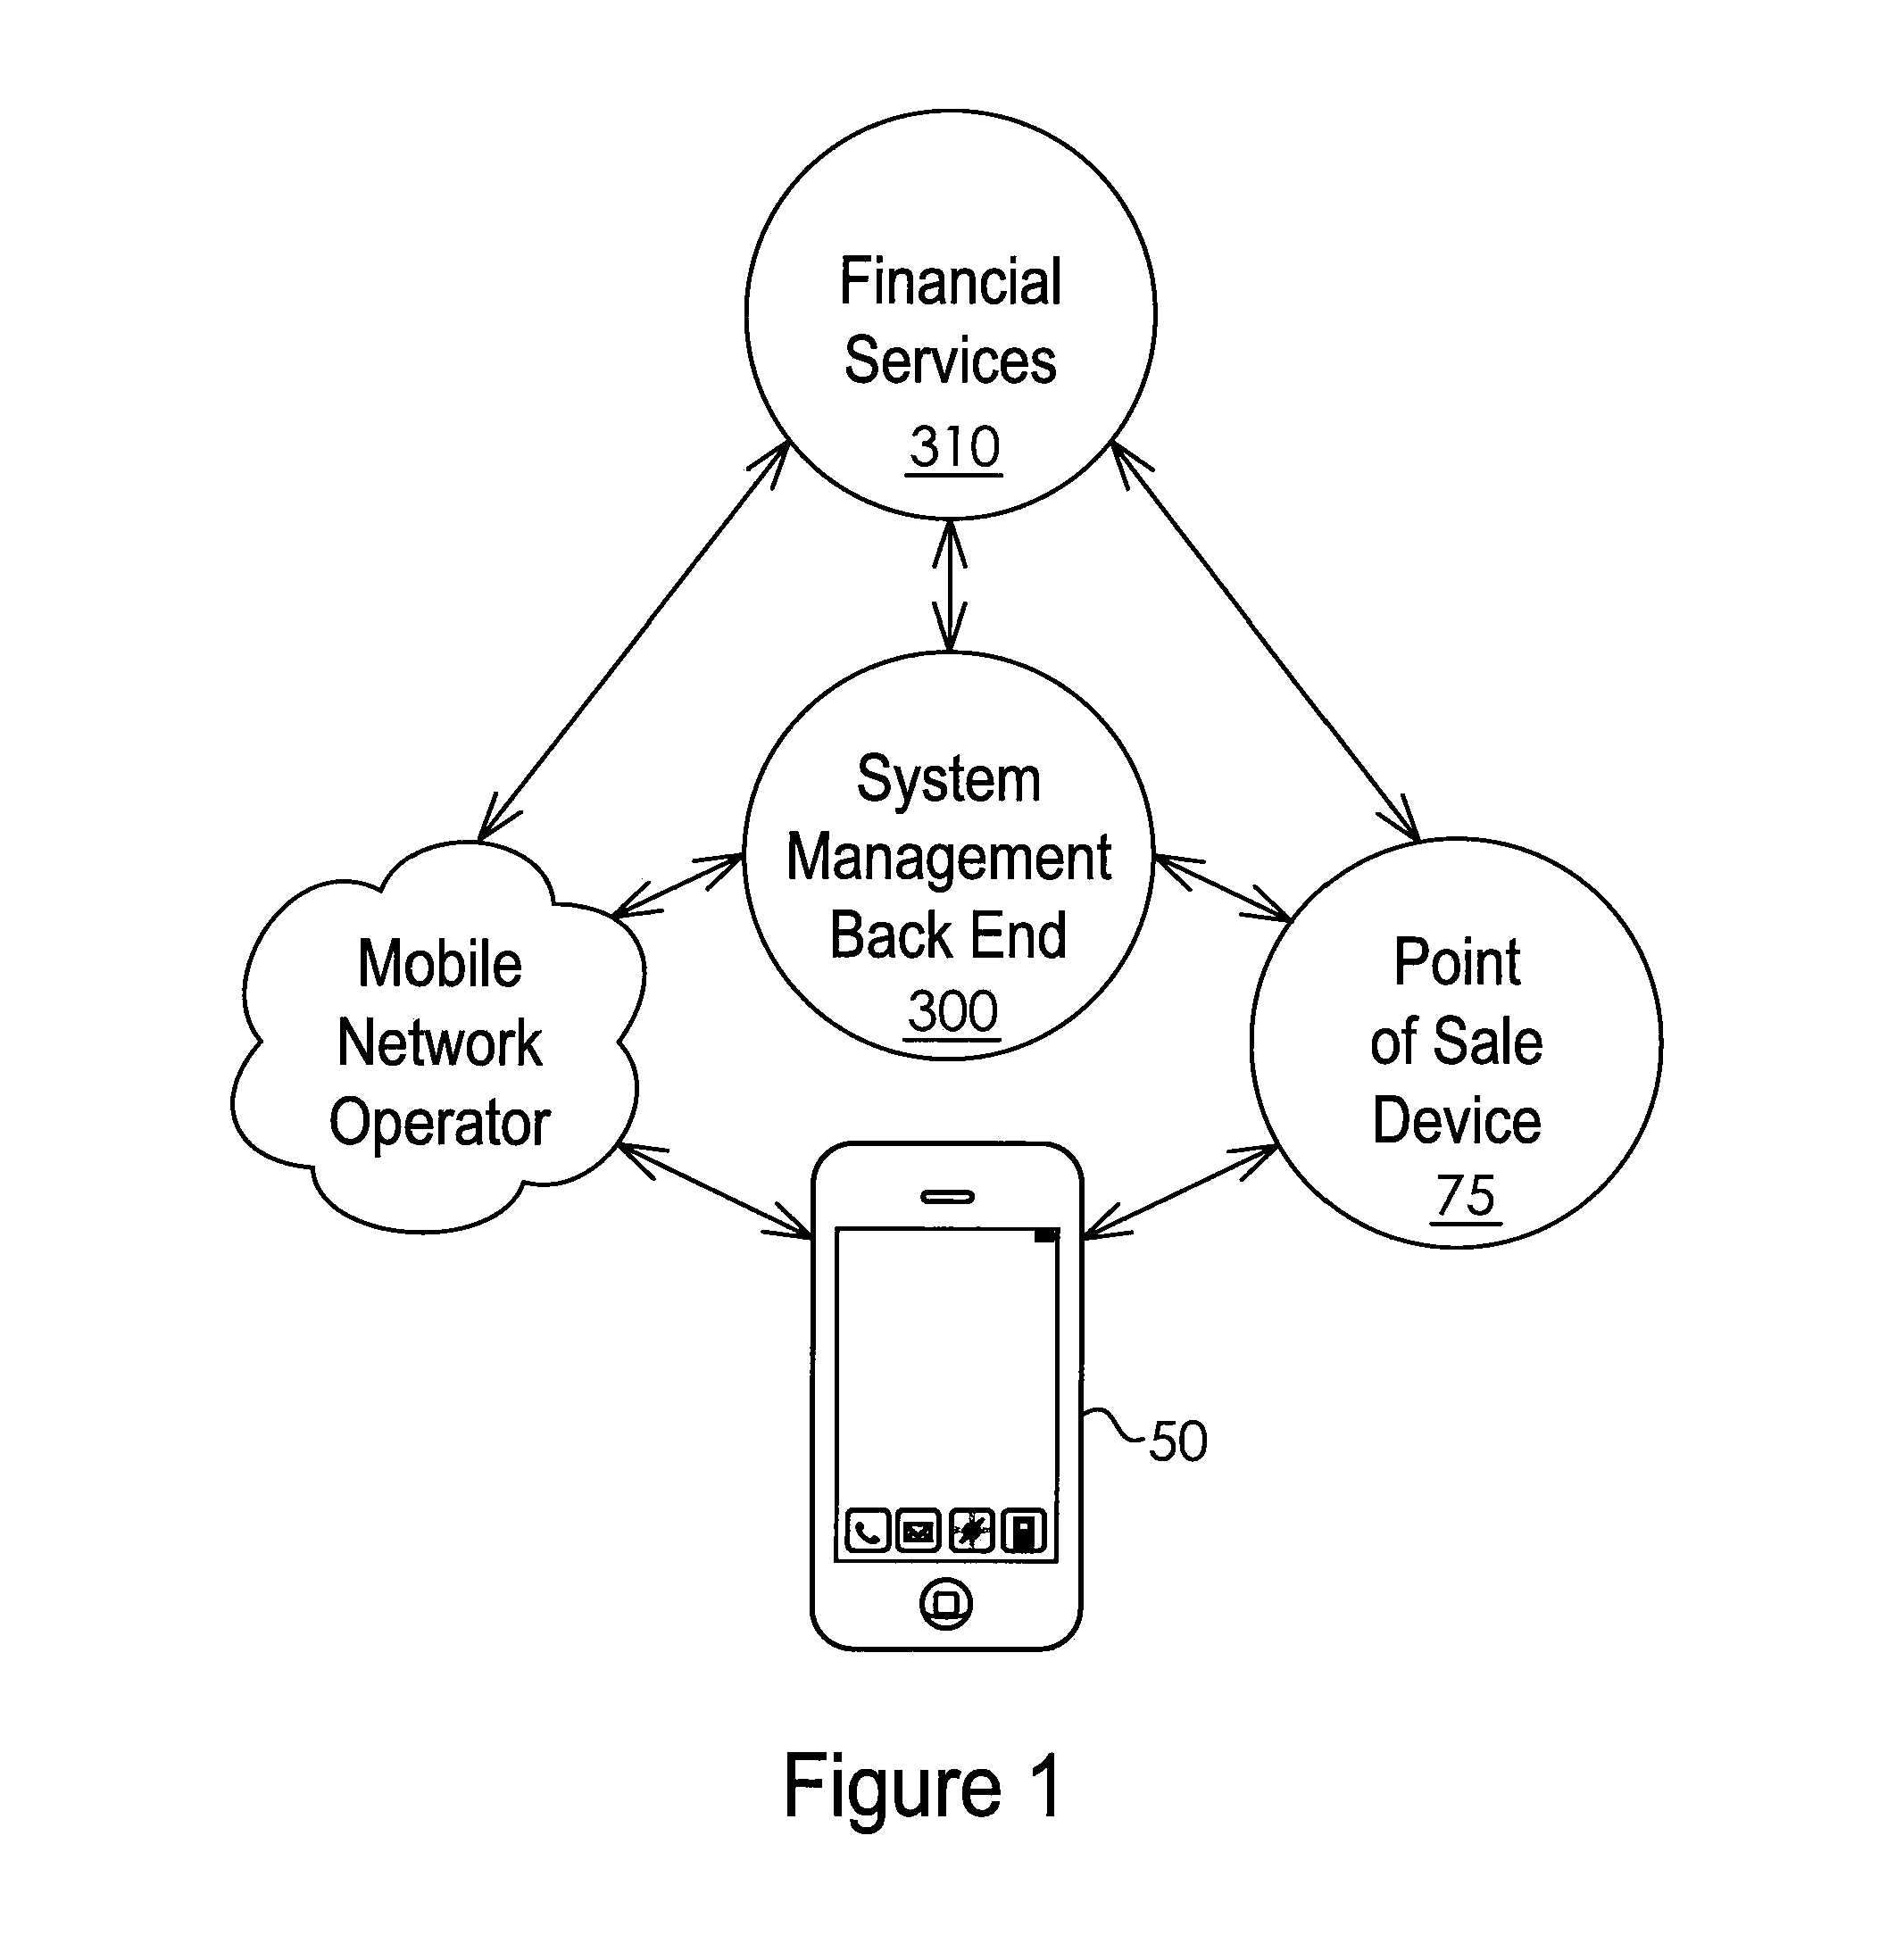 System for Storing One or More Passwords in a Secure Element